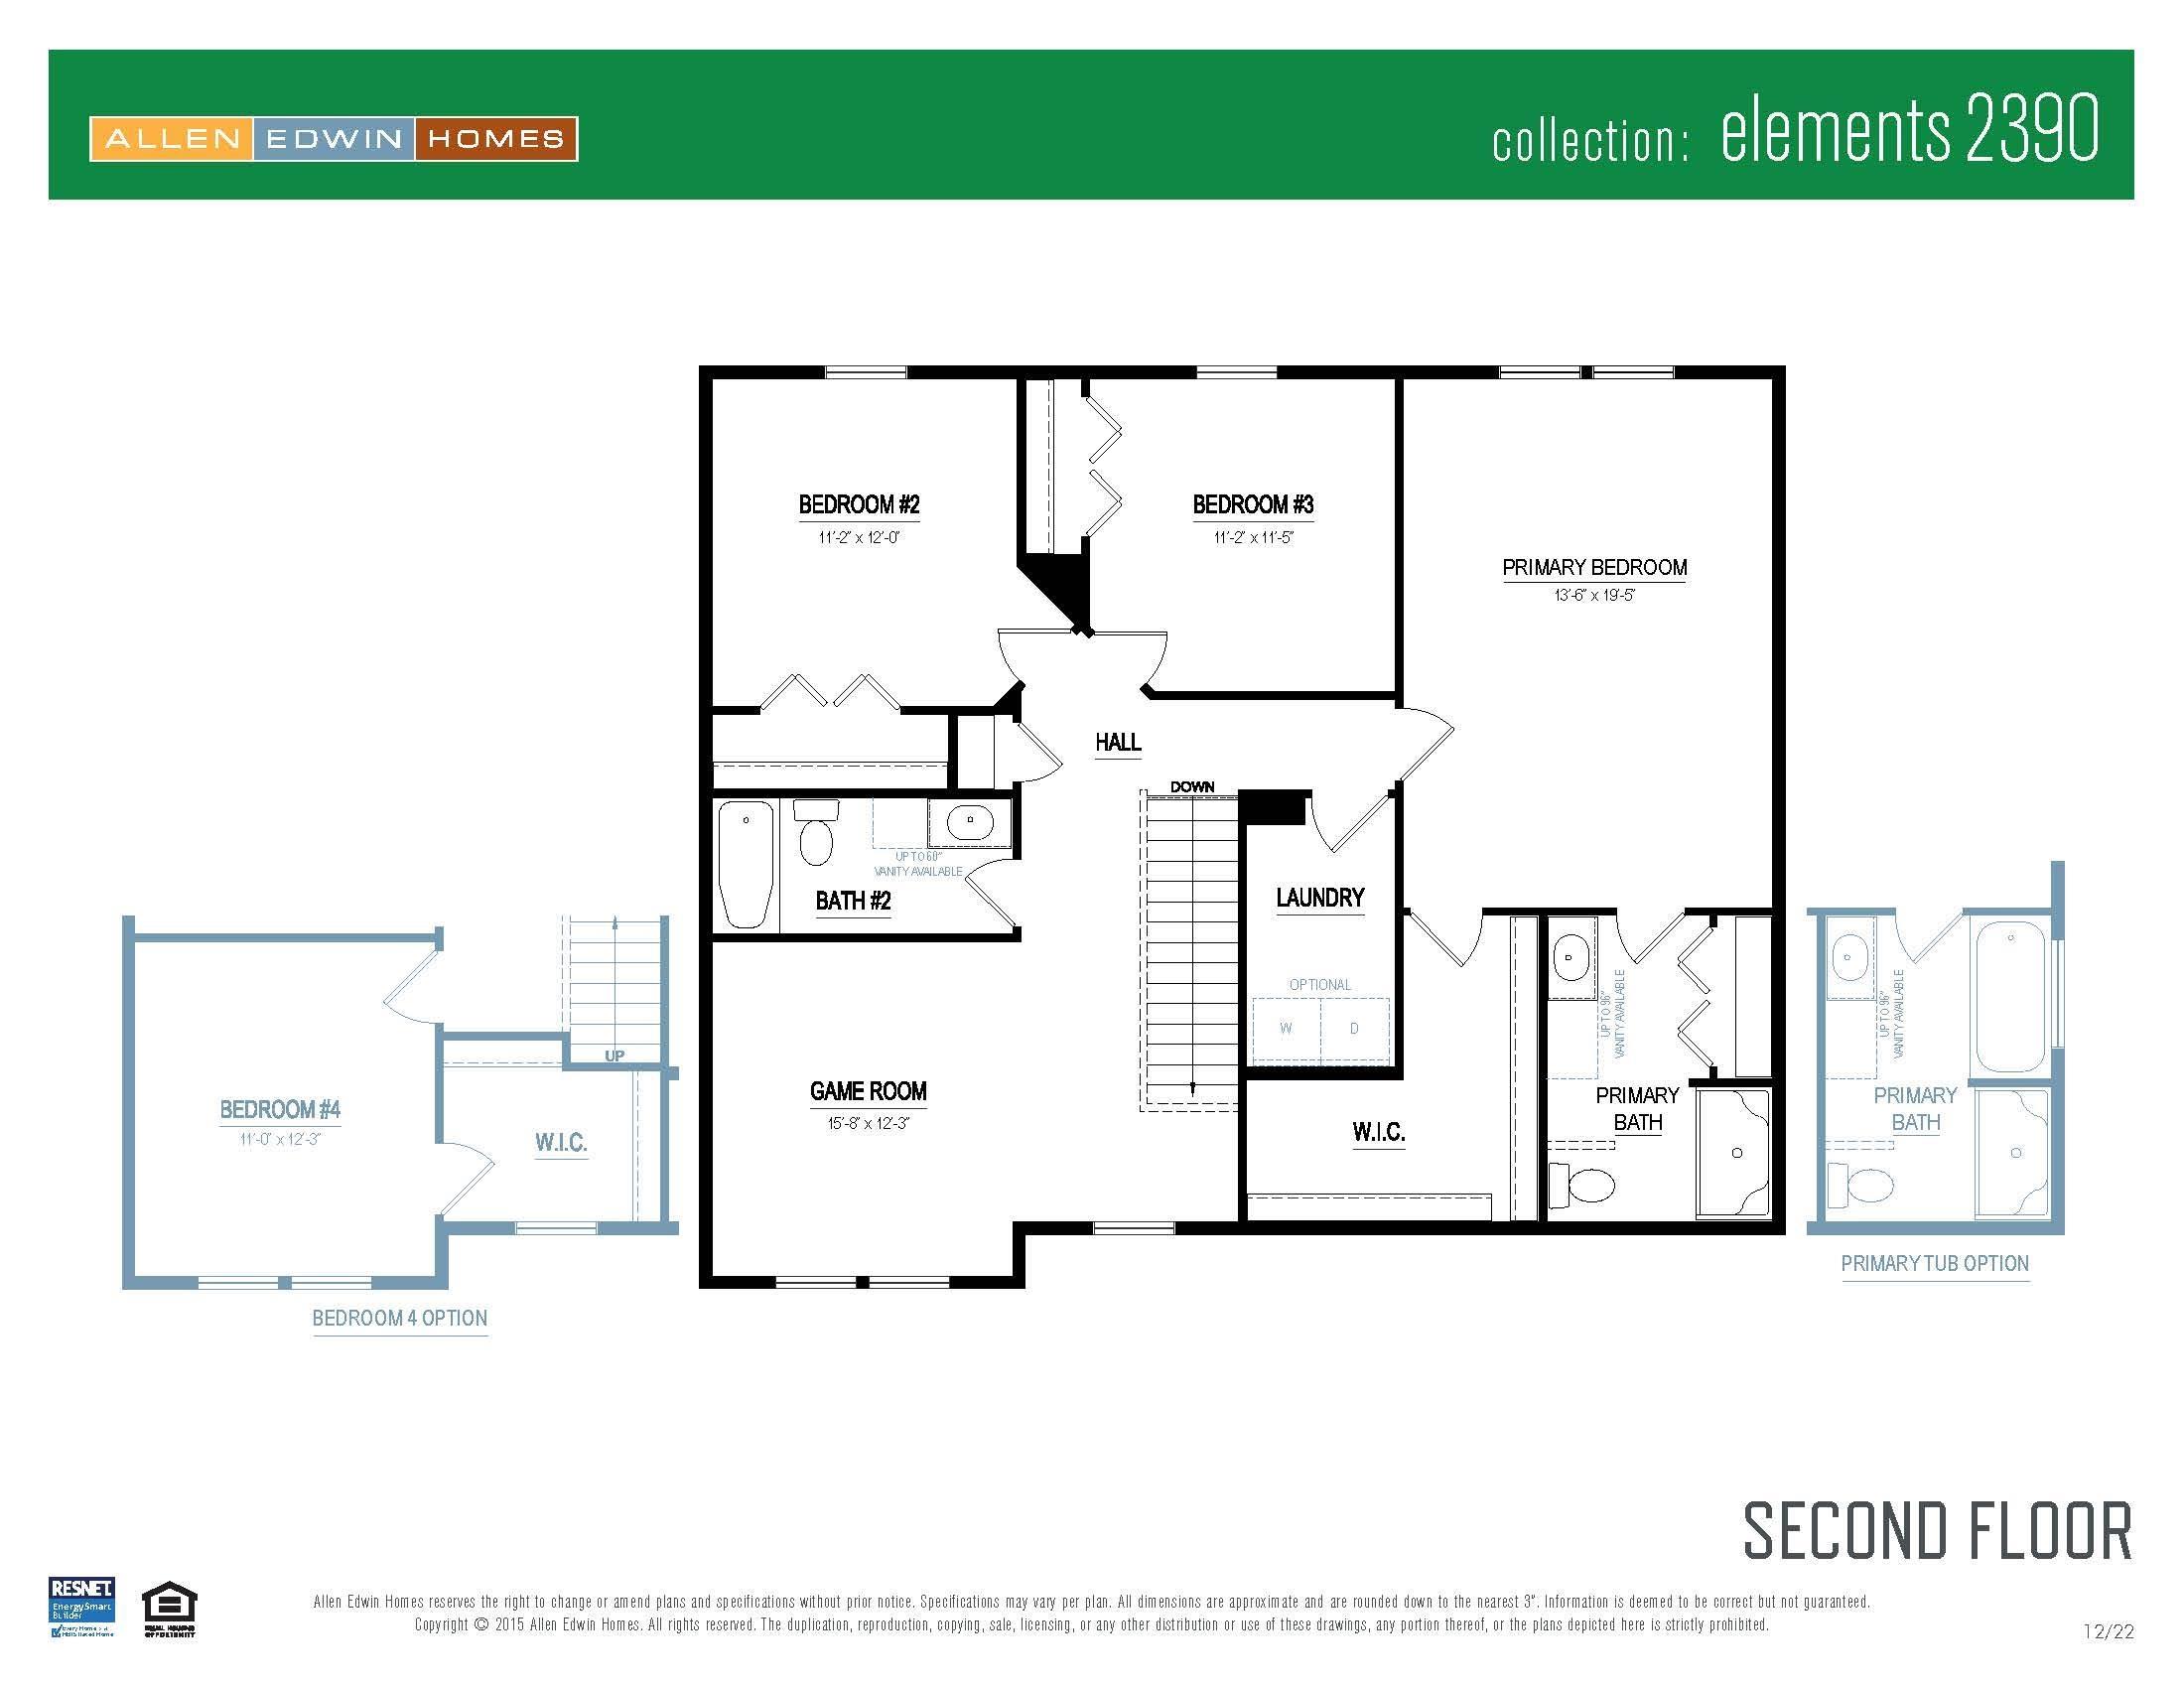 Standard floor plan layout, actual home may vary in options.